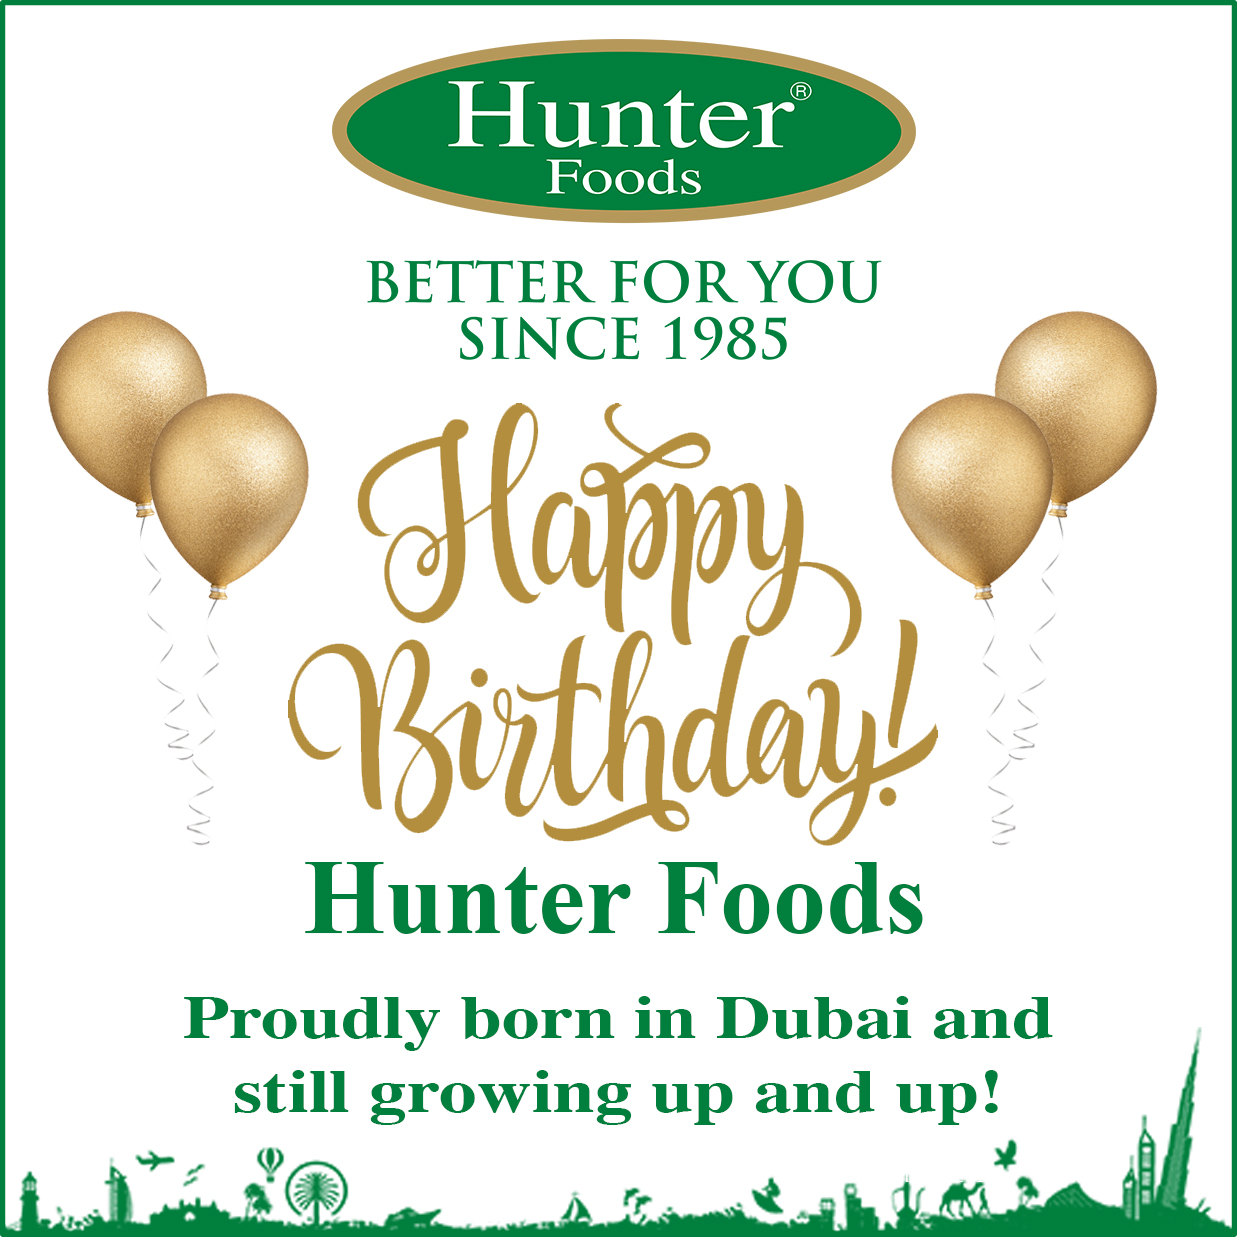 Happy Birthday, Hunter Foods! Proudly born in Dubai and still growing up and up!